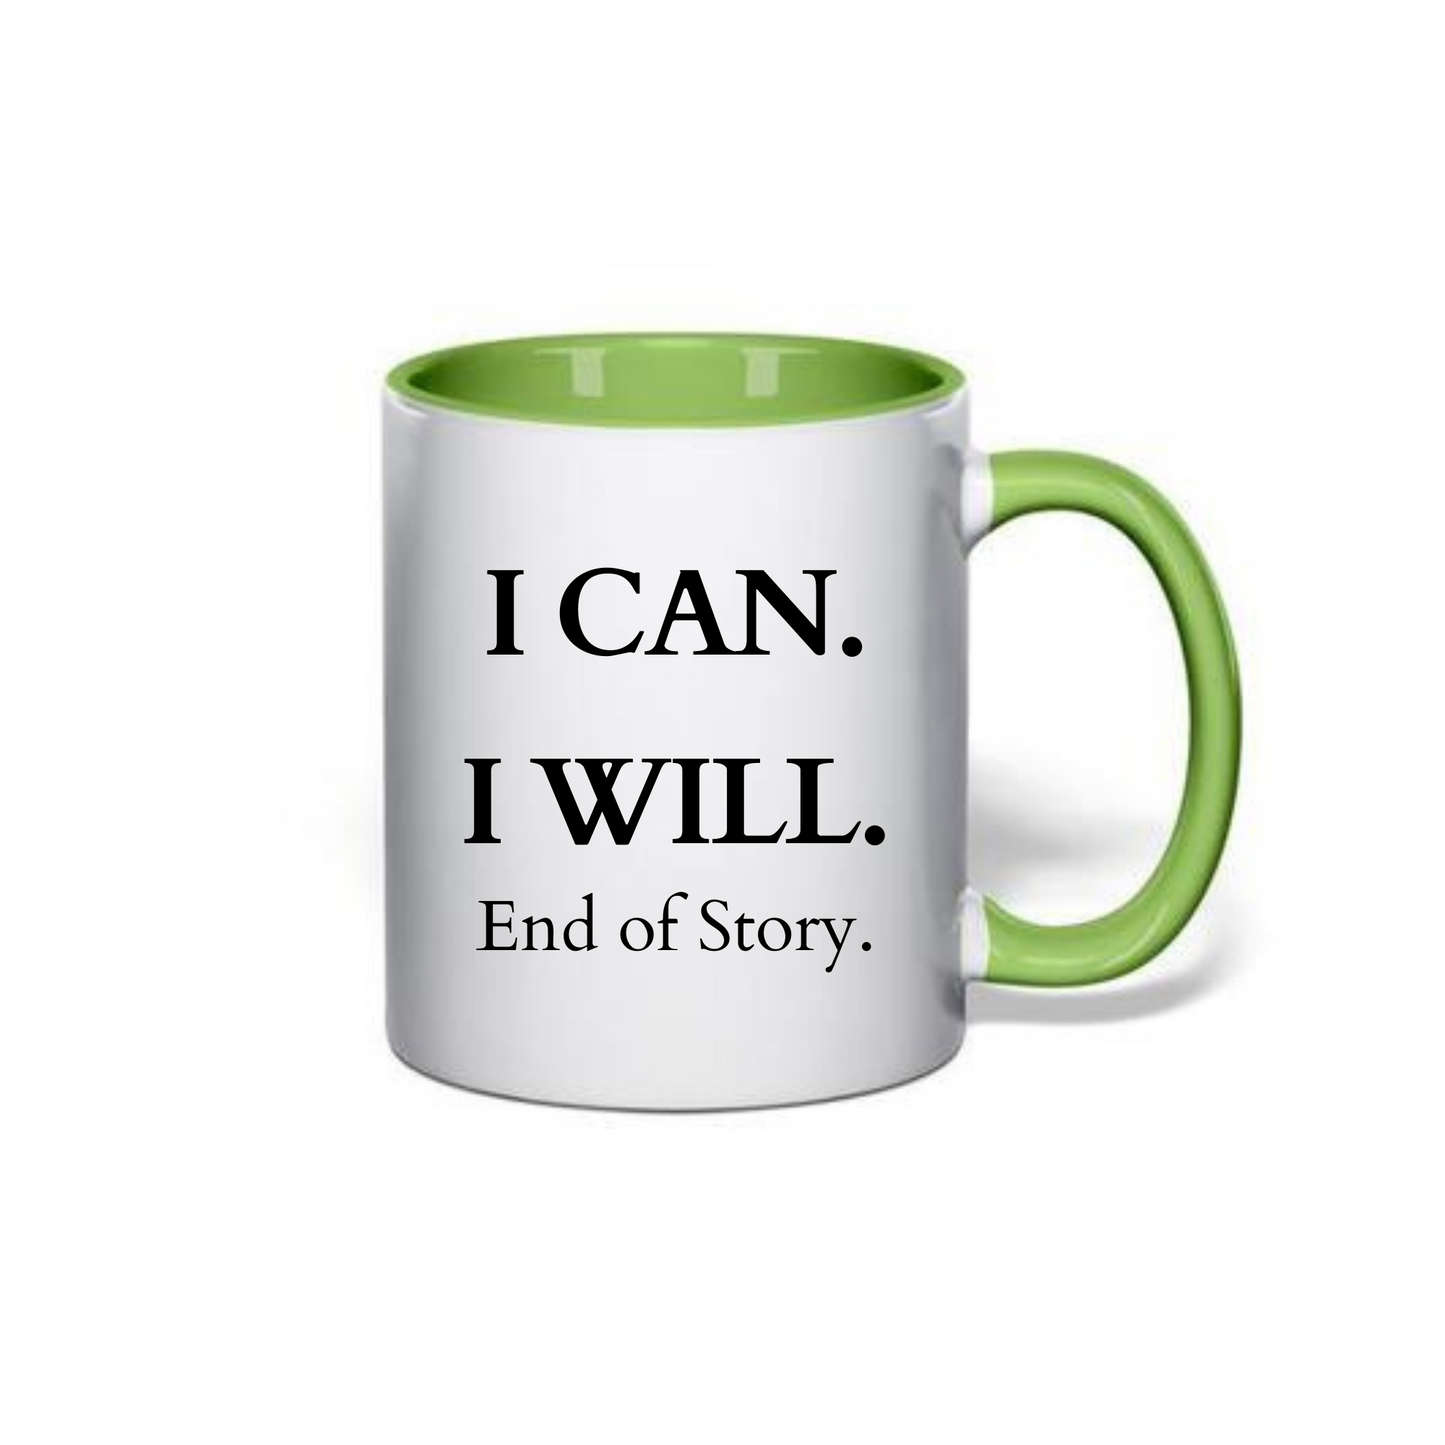 I Can I Will End of Story Mug